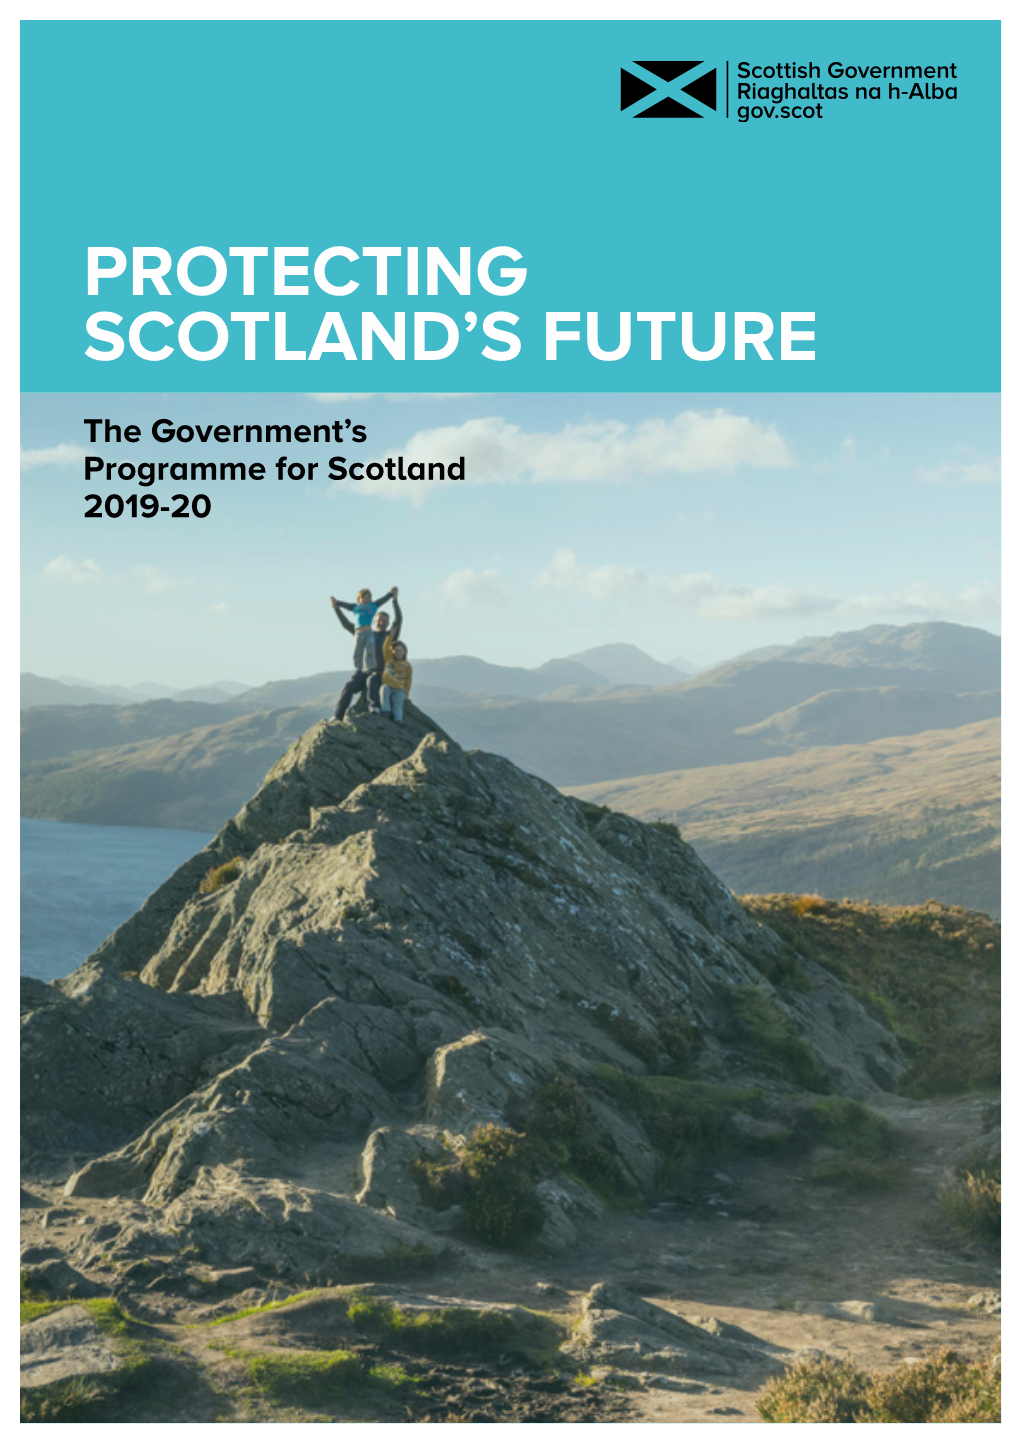 The Government's Programme for Scotland 2019-20